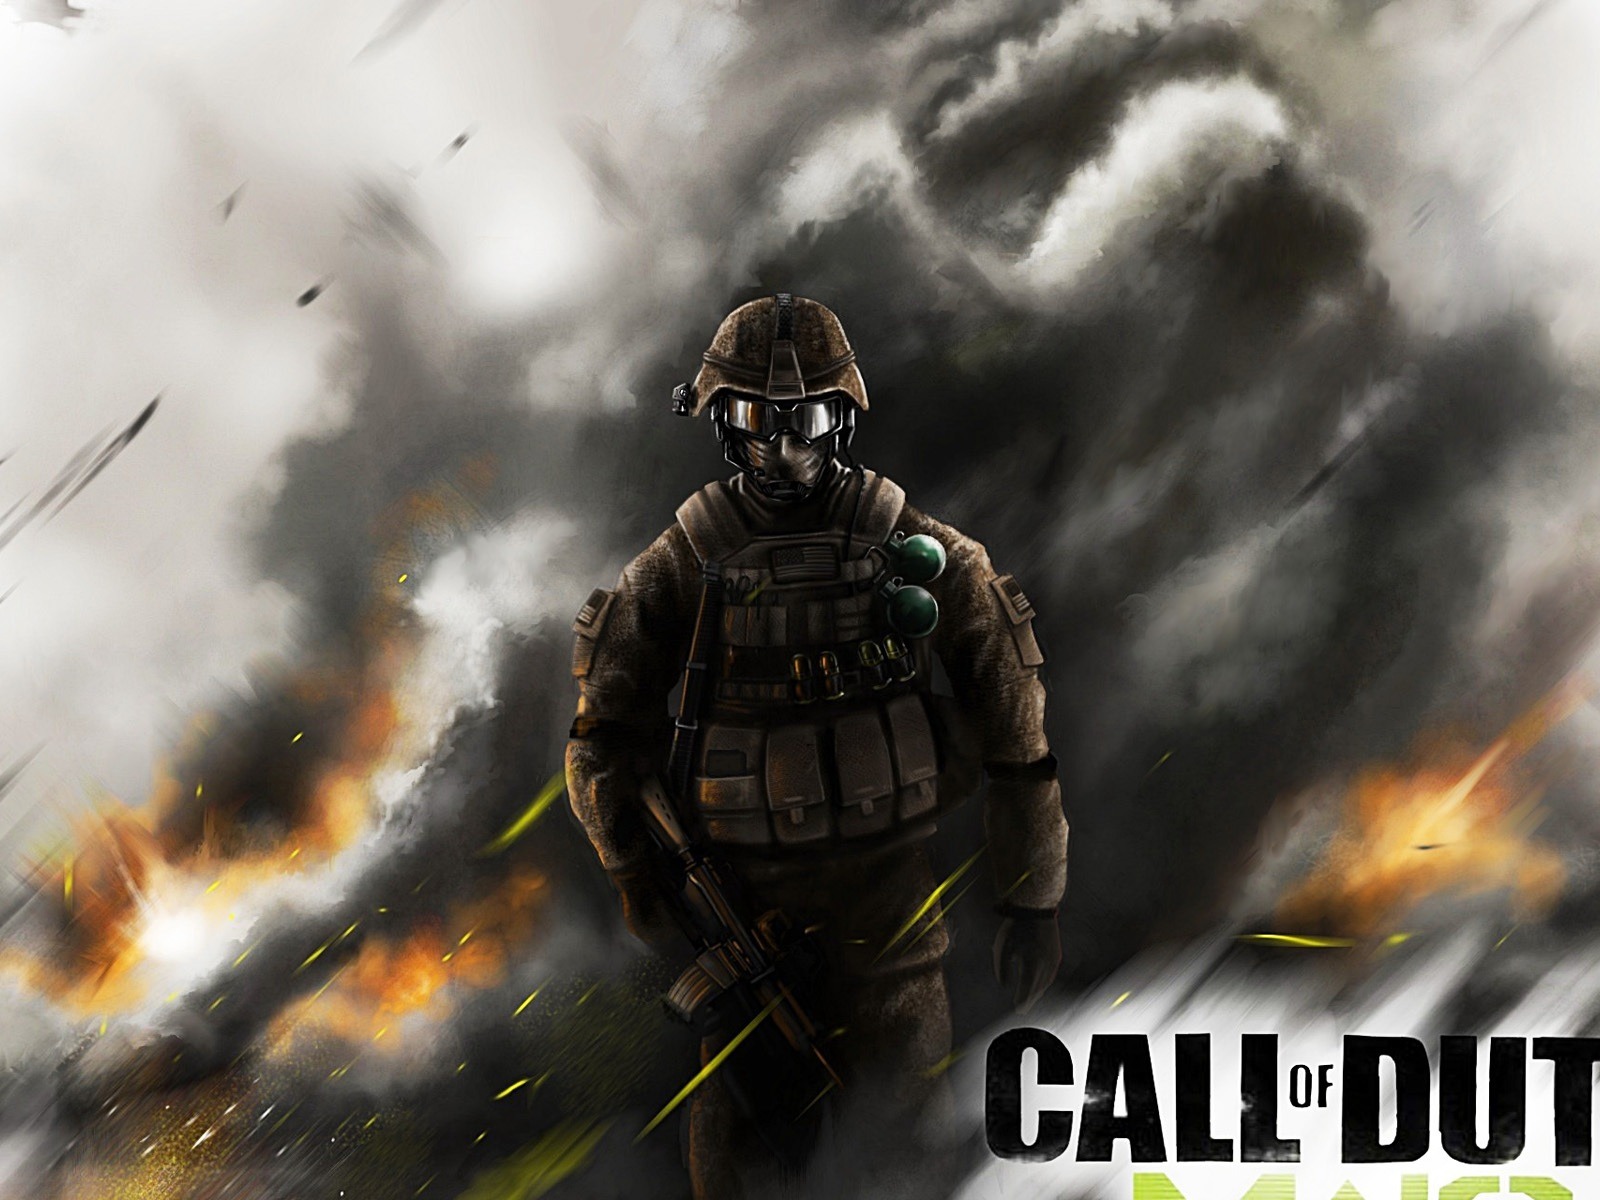 Call of Duty: MW3 HD wallpapers #15 - 1600x1200